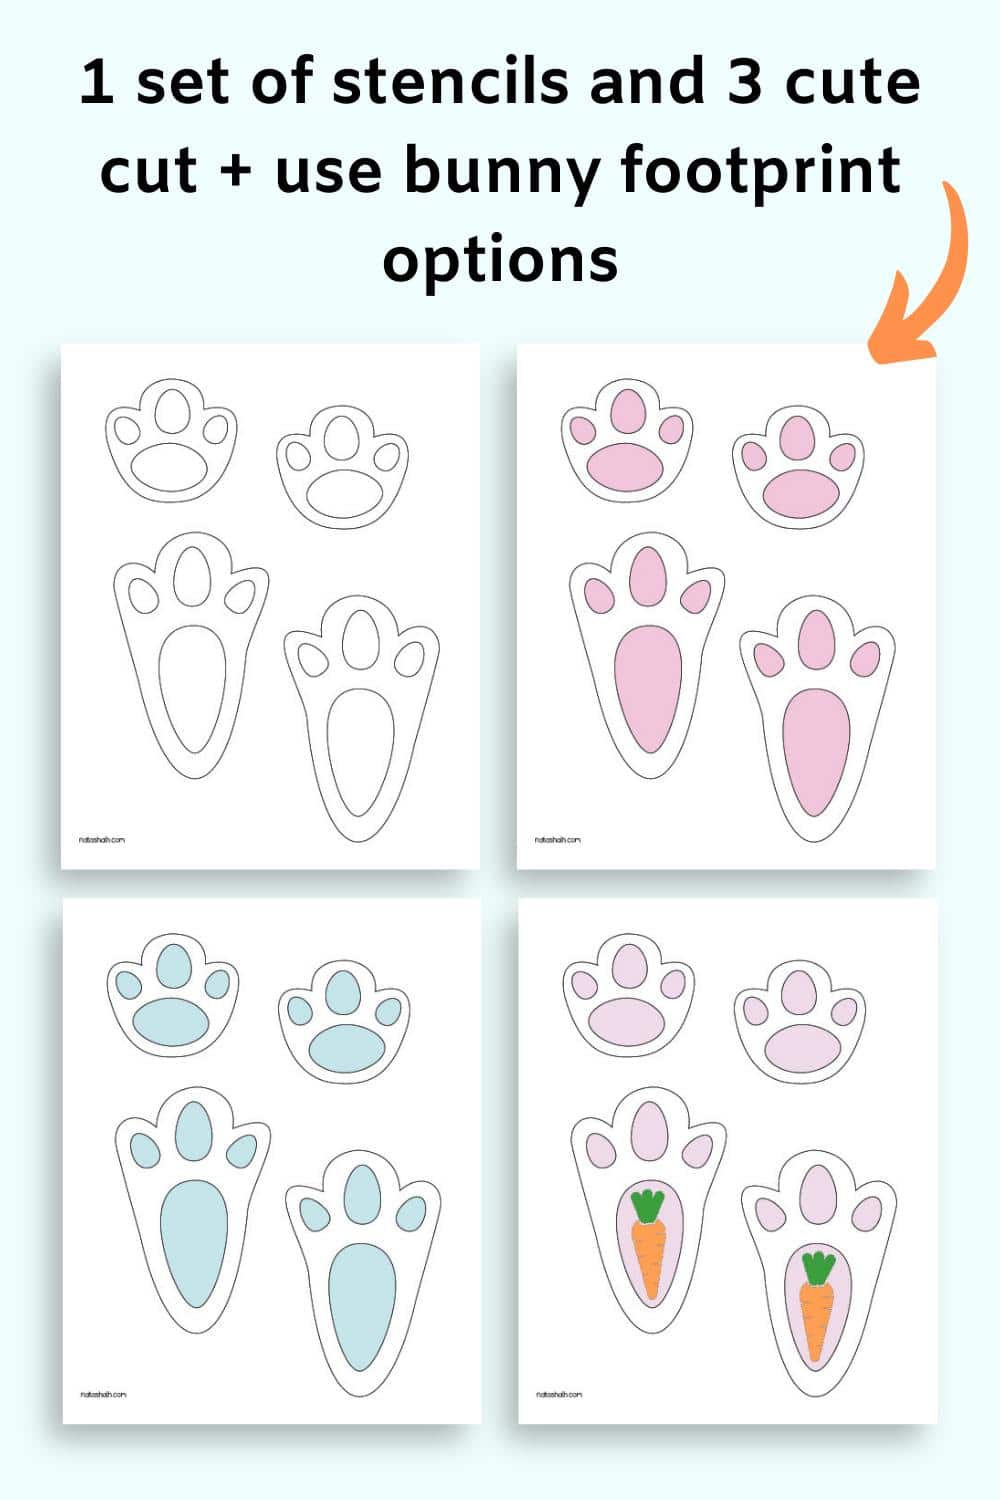 Text "1 set of stencils and 3 cute cut + use bunny footprint options" with a preview of four bunny footprint stencils